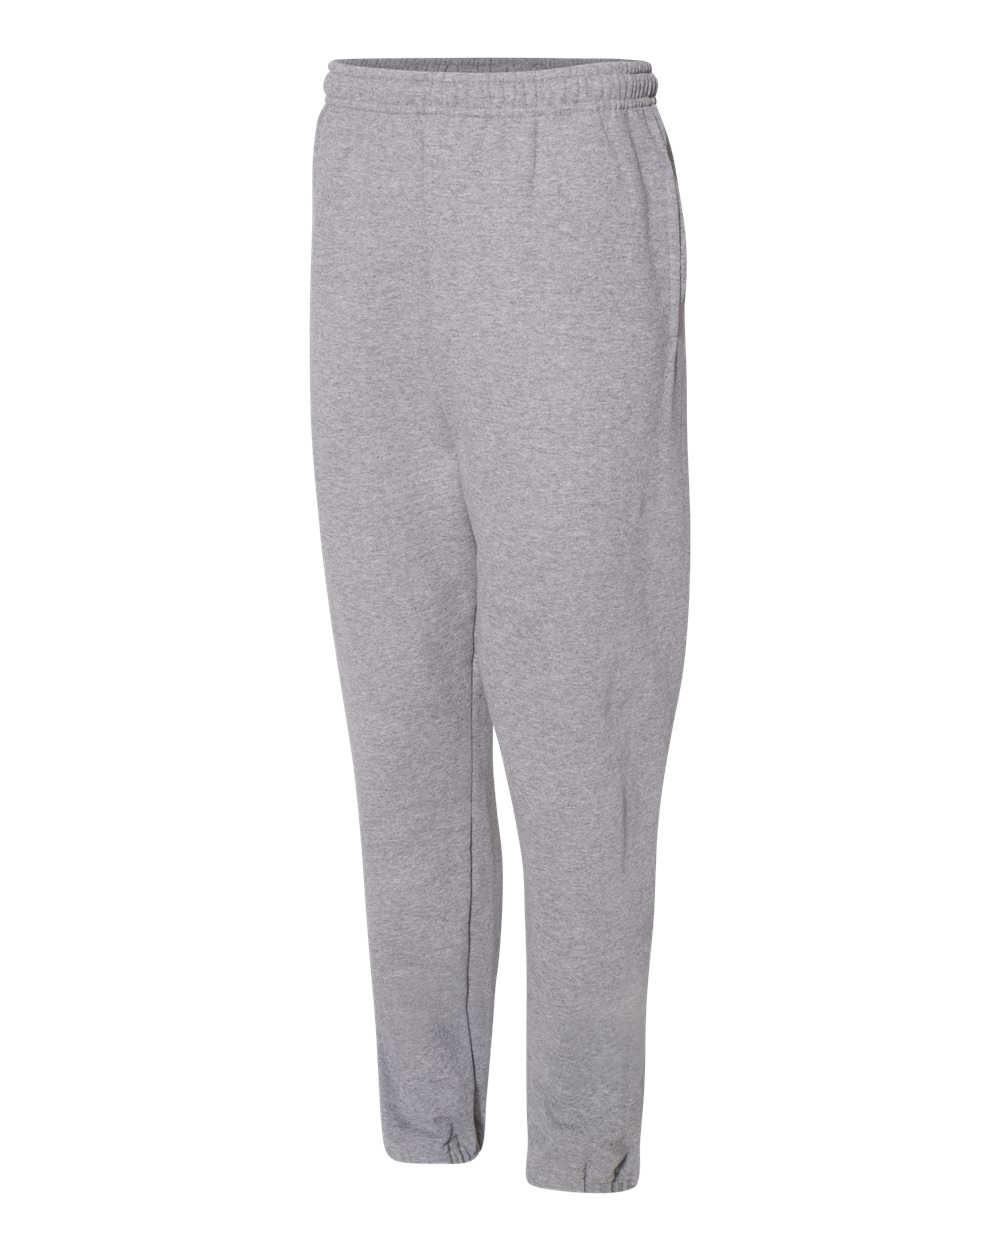 Russell Athletic 029HBM - Dri Power Closed Bottom Sweatpants with ...